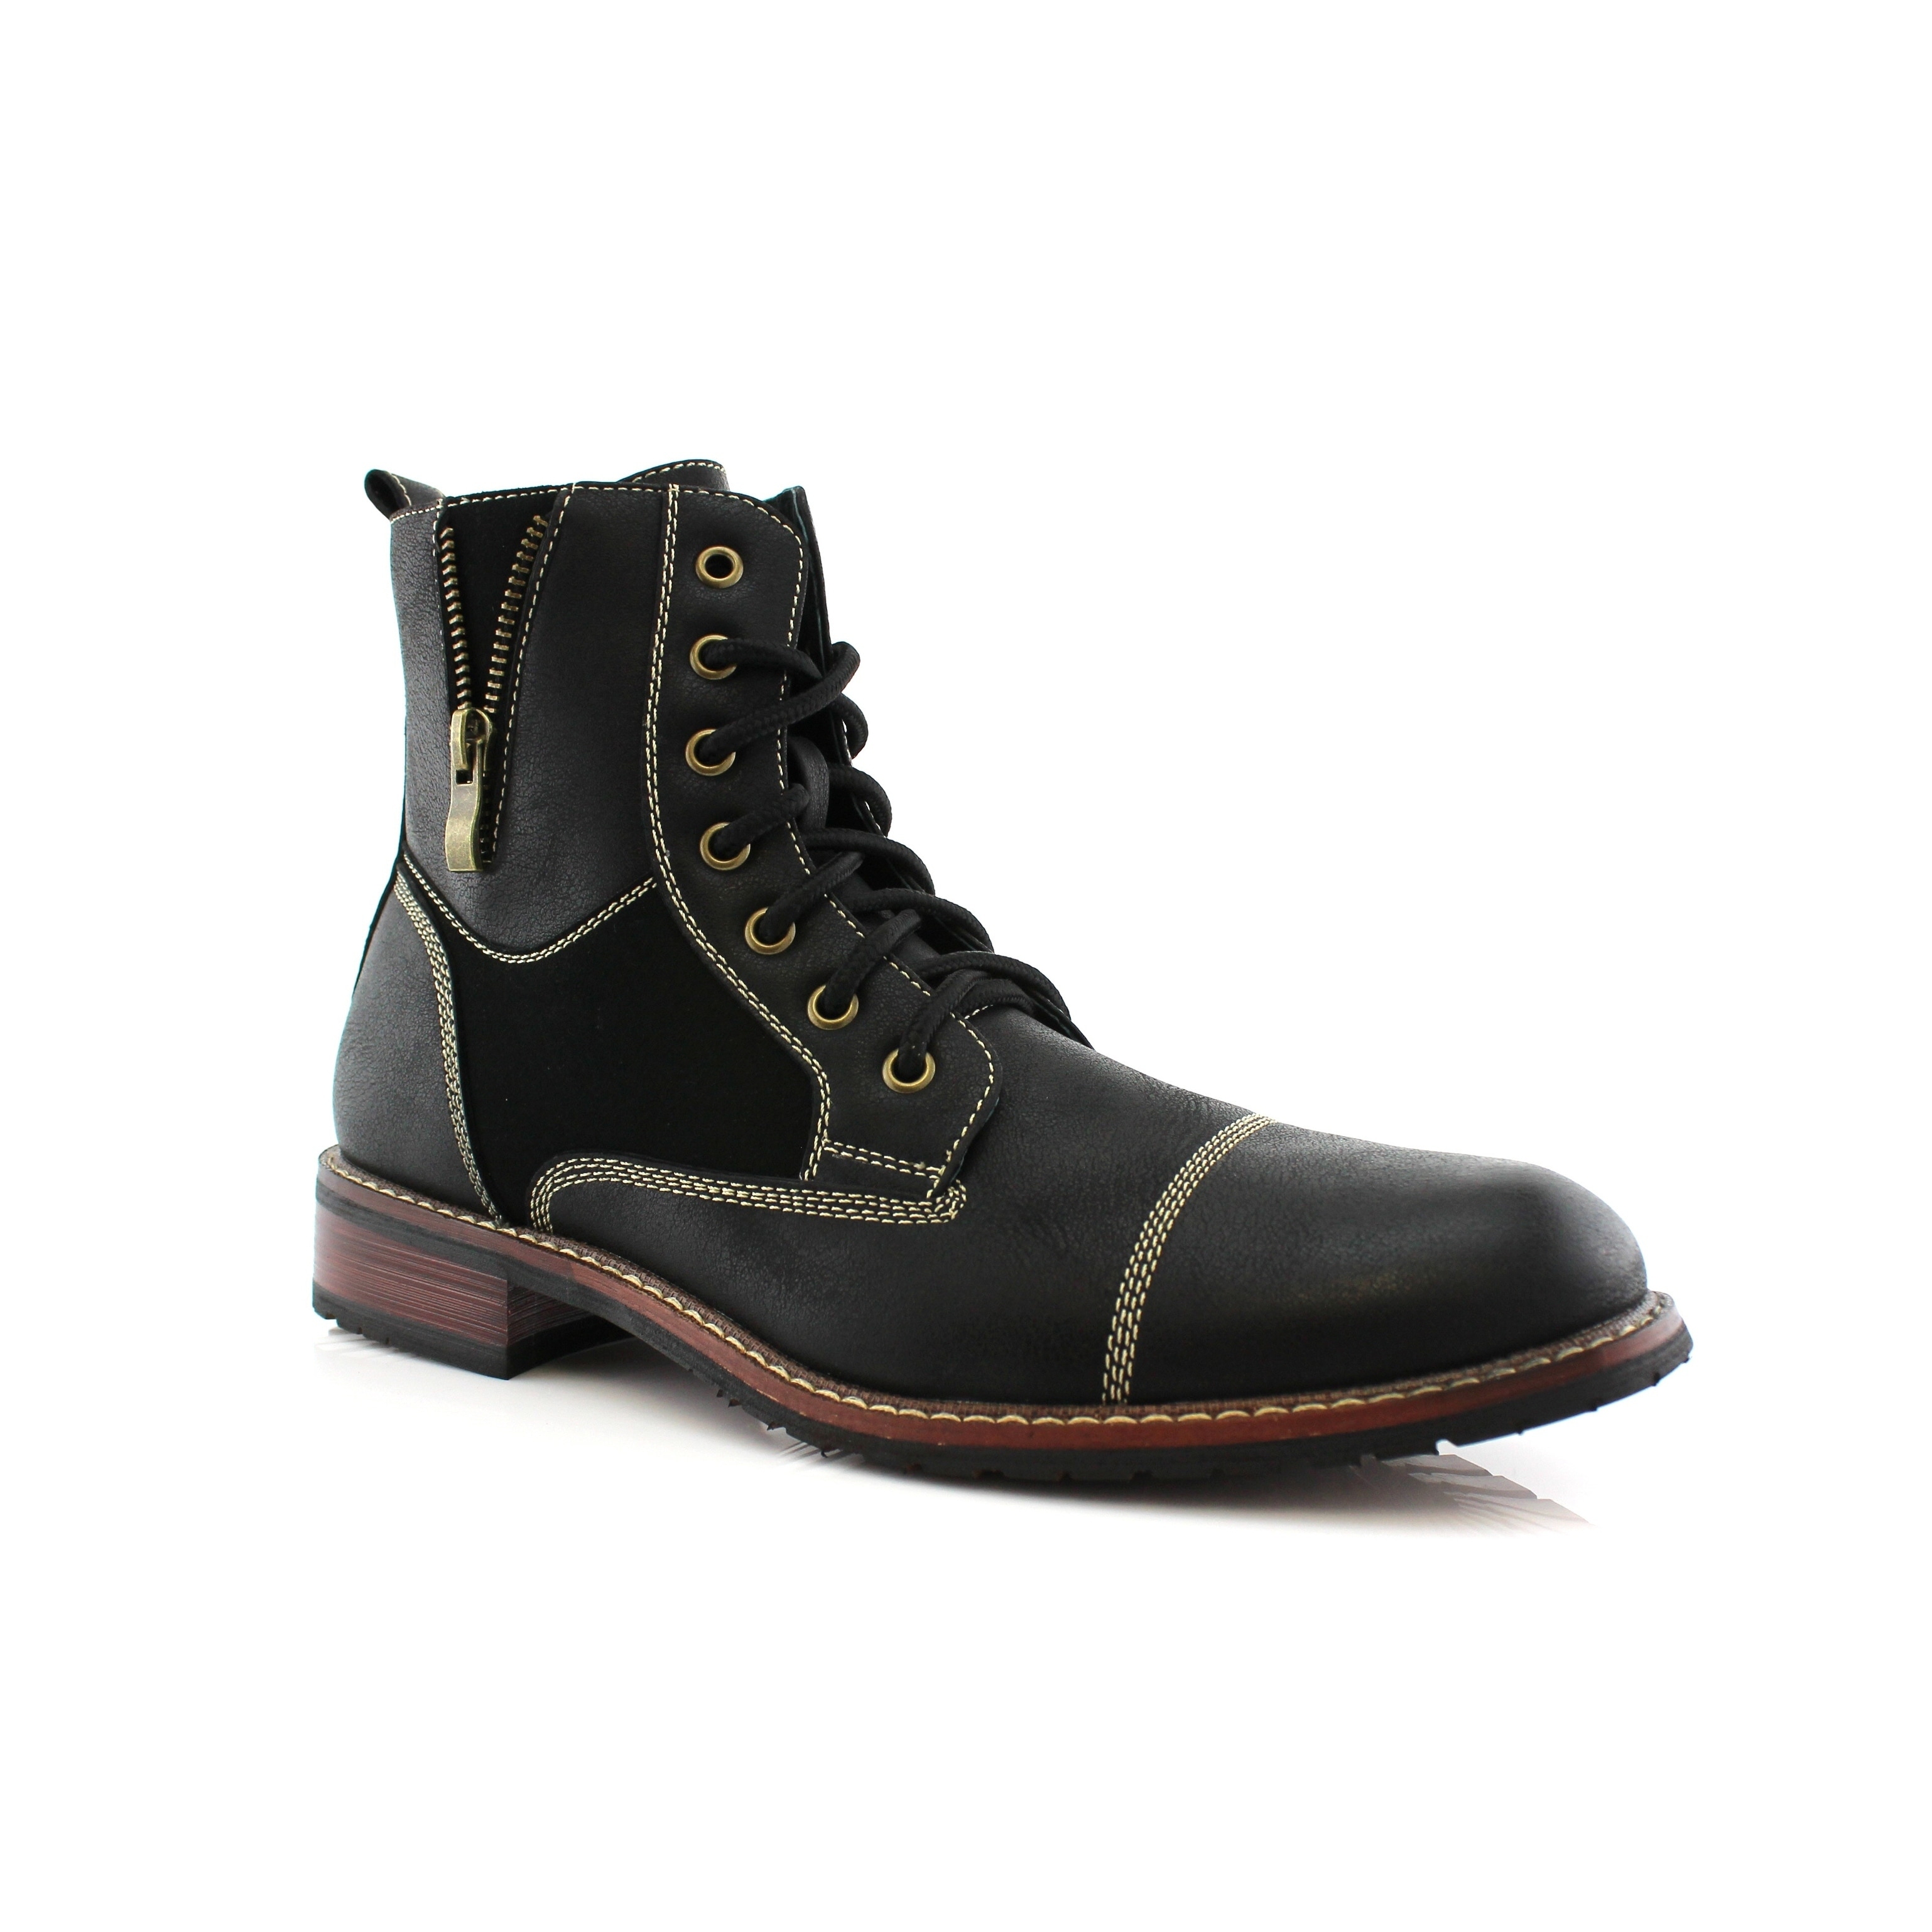 Combat Boots For Work or Casual Wear 